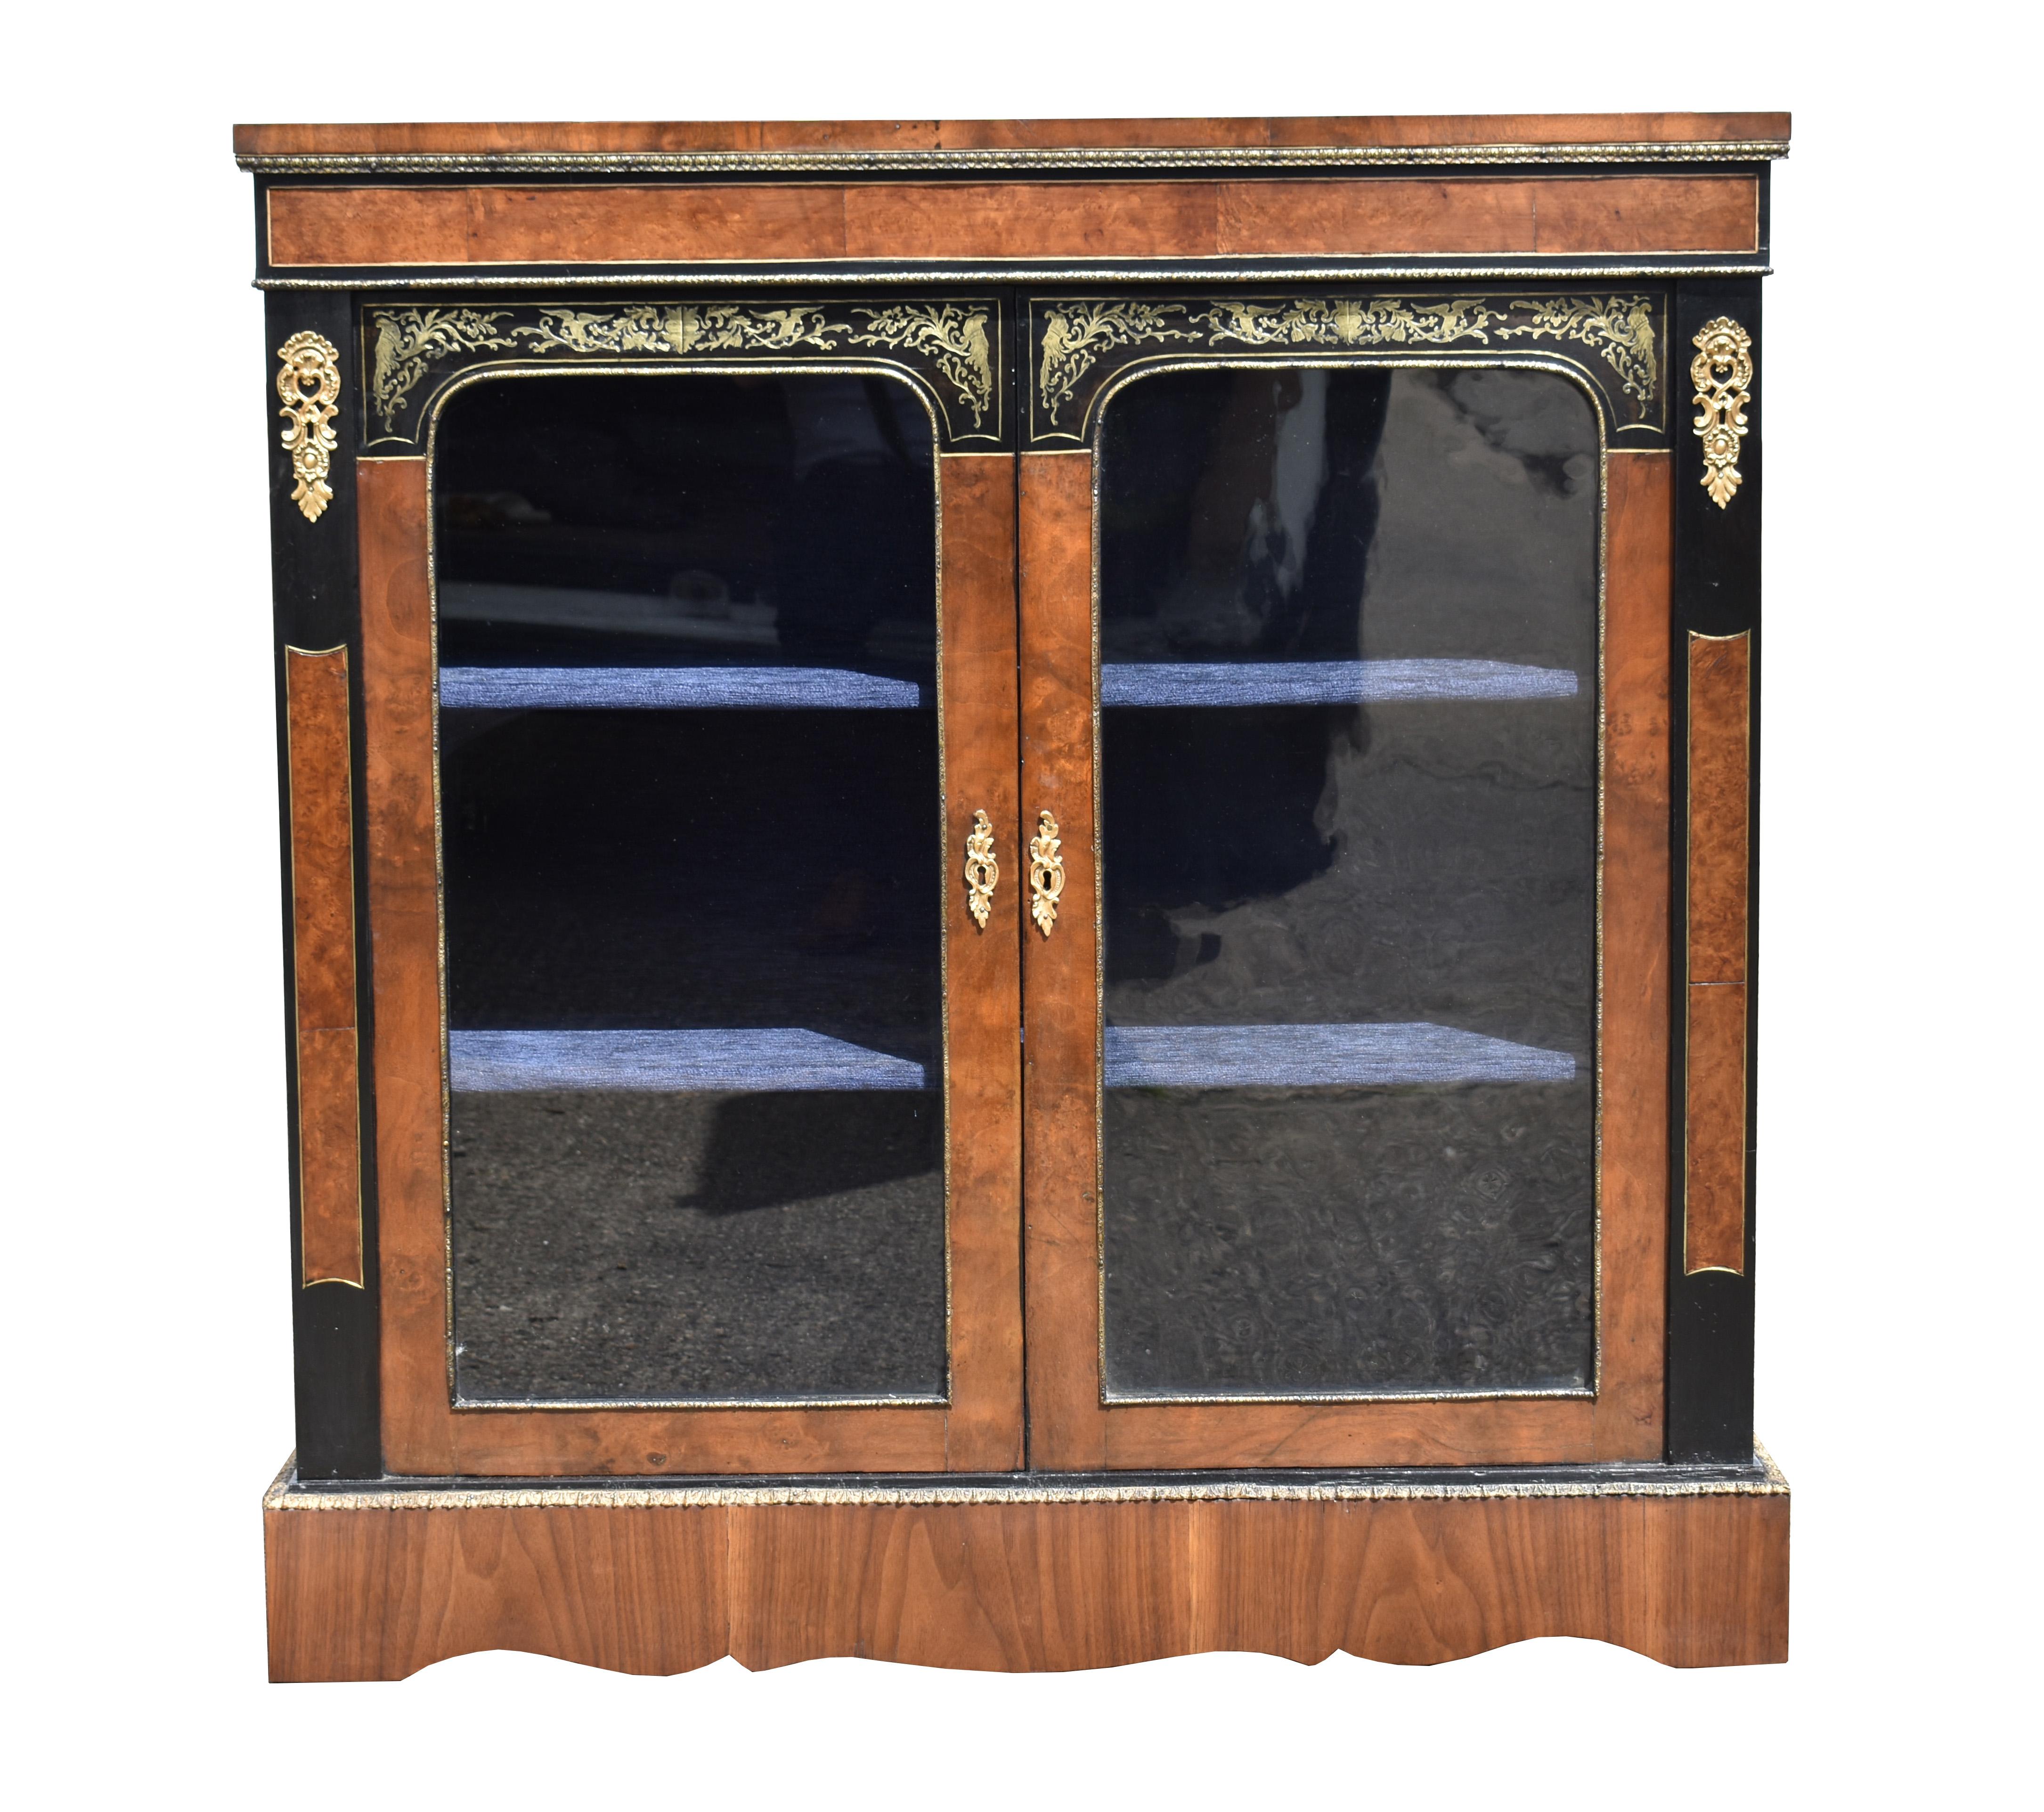 For sale is a good quality Victorian walnut and ebonized pier cabinet, having two brass inlaid doors above a shaped plinth. This piece remains in good overall condition, showing minor signs of wear commensurate with age and use. 

Measures: Width